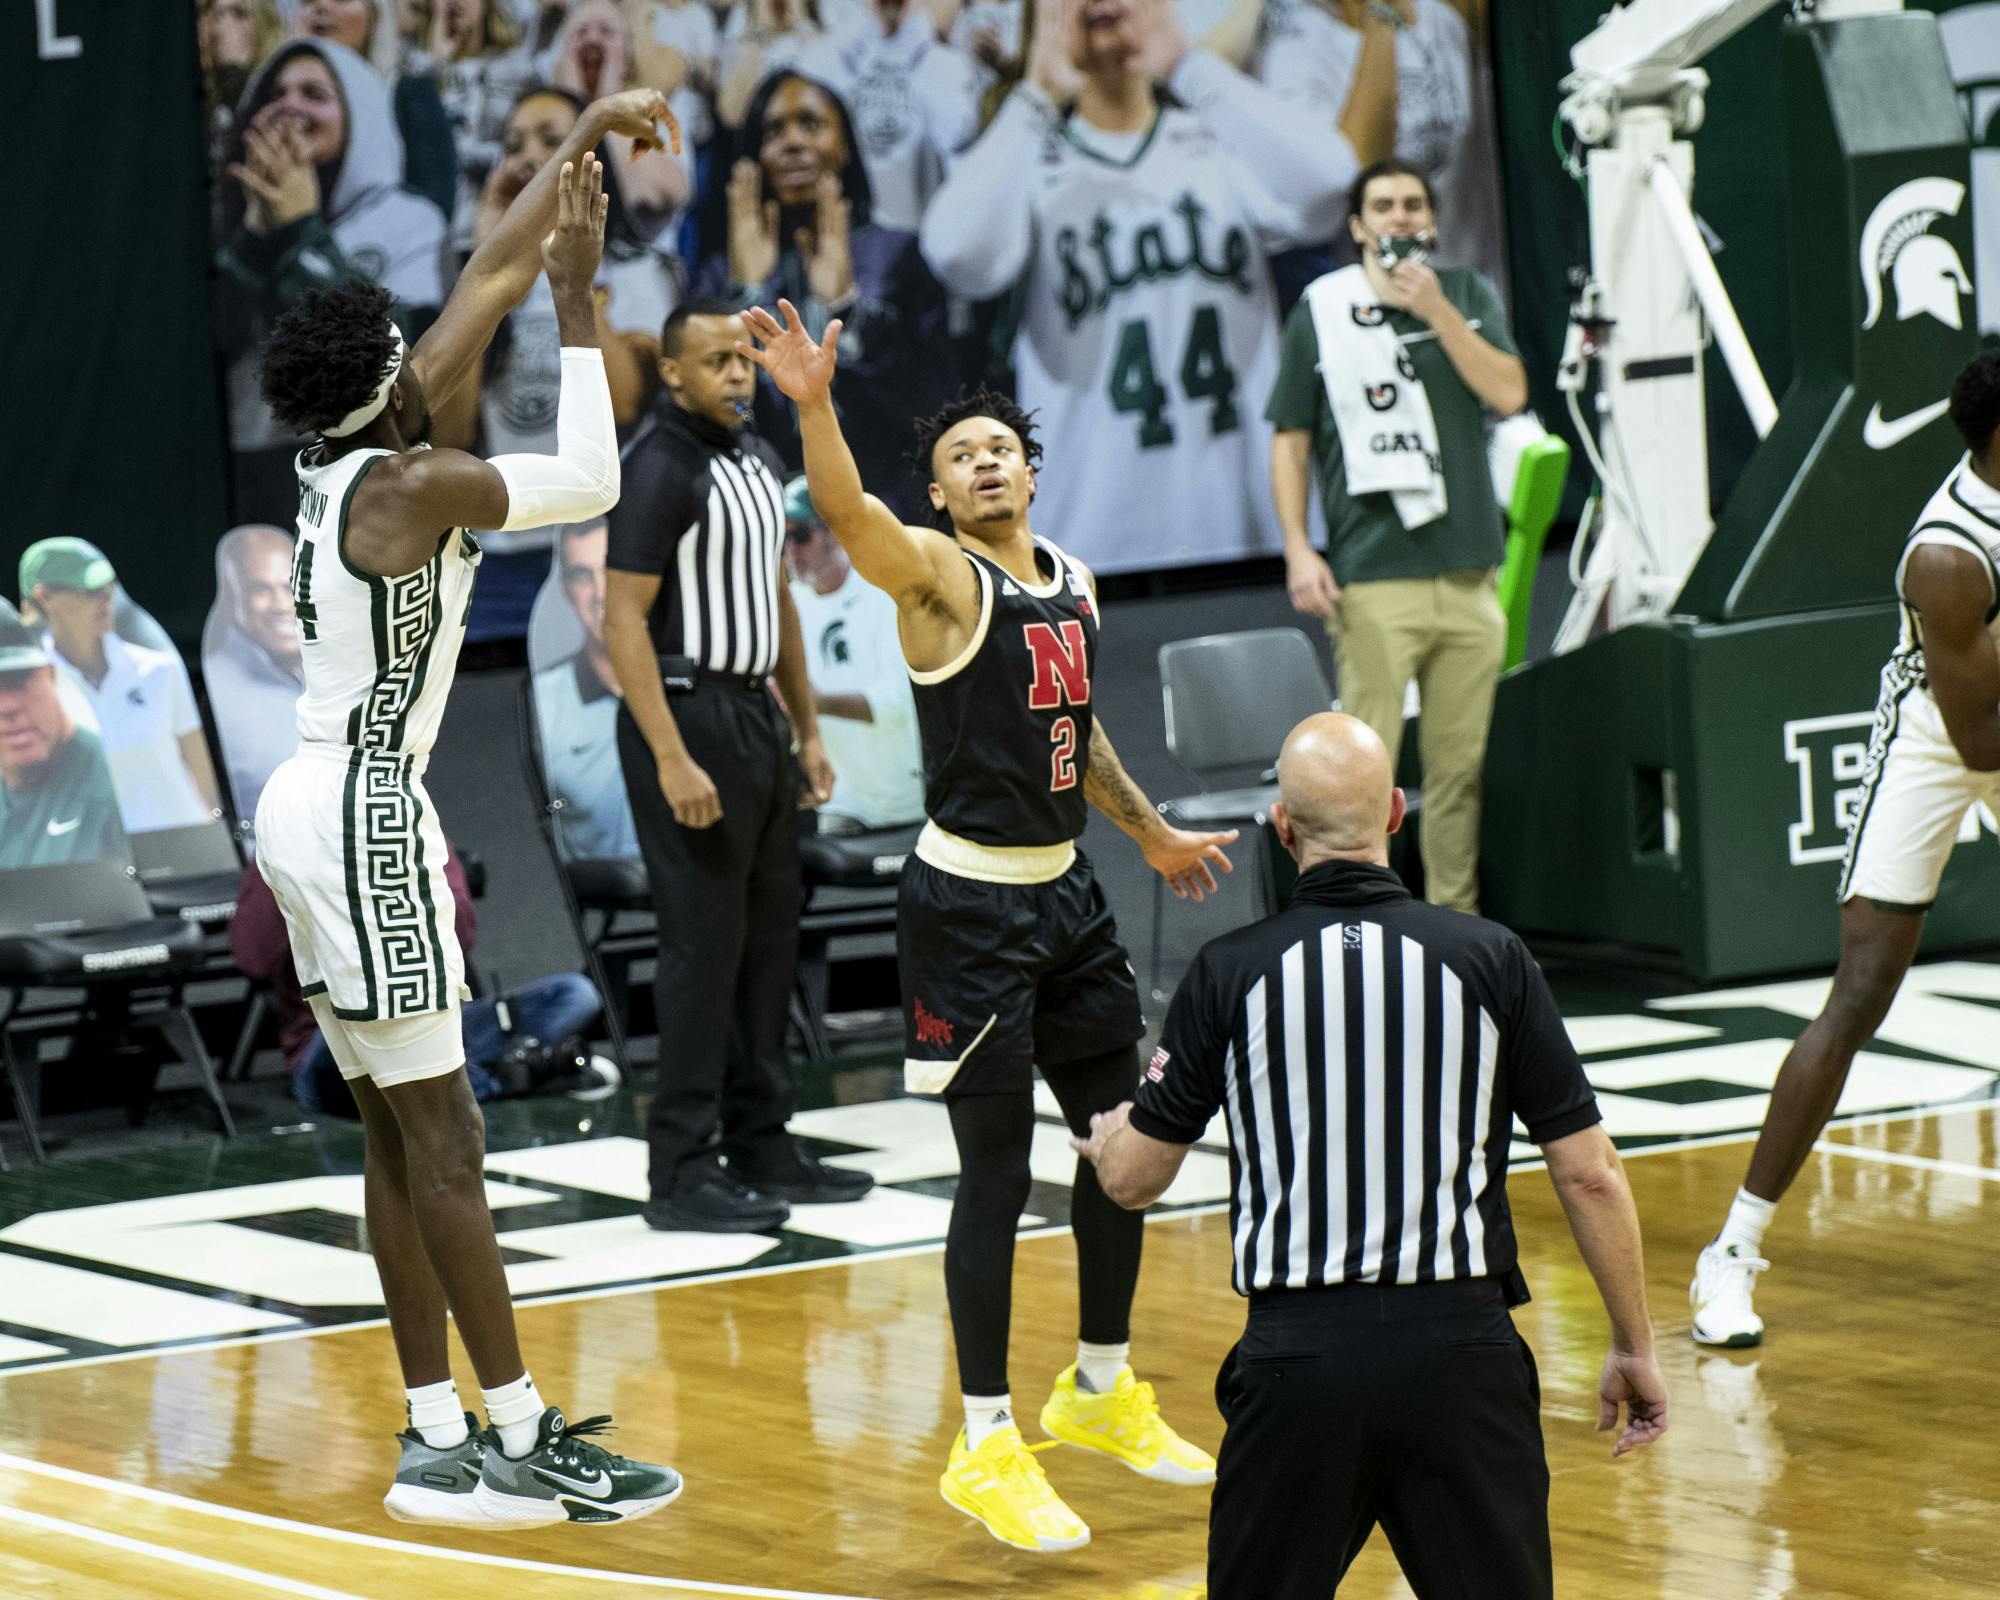 <p>Junior forward Gabe Brown (44) shoots a 3-pointer during the game against Nebraska on Feb. 6, 2021, at the Breslin Center. The Spartans defeated the Cornhuskers, 66-56.</p>